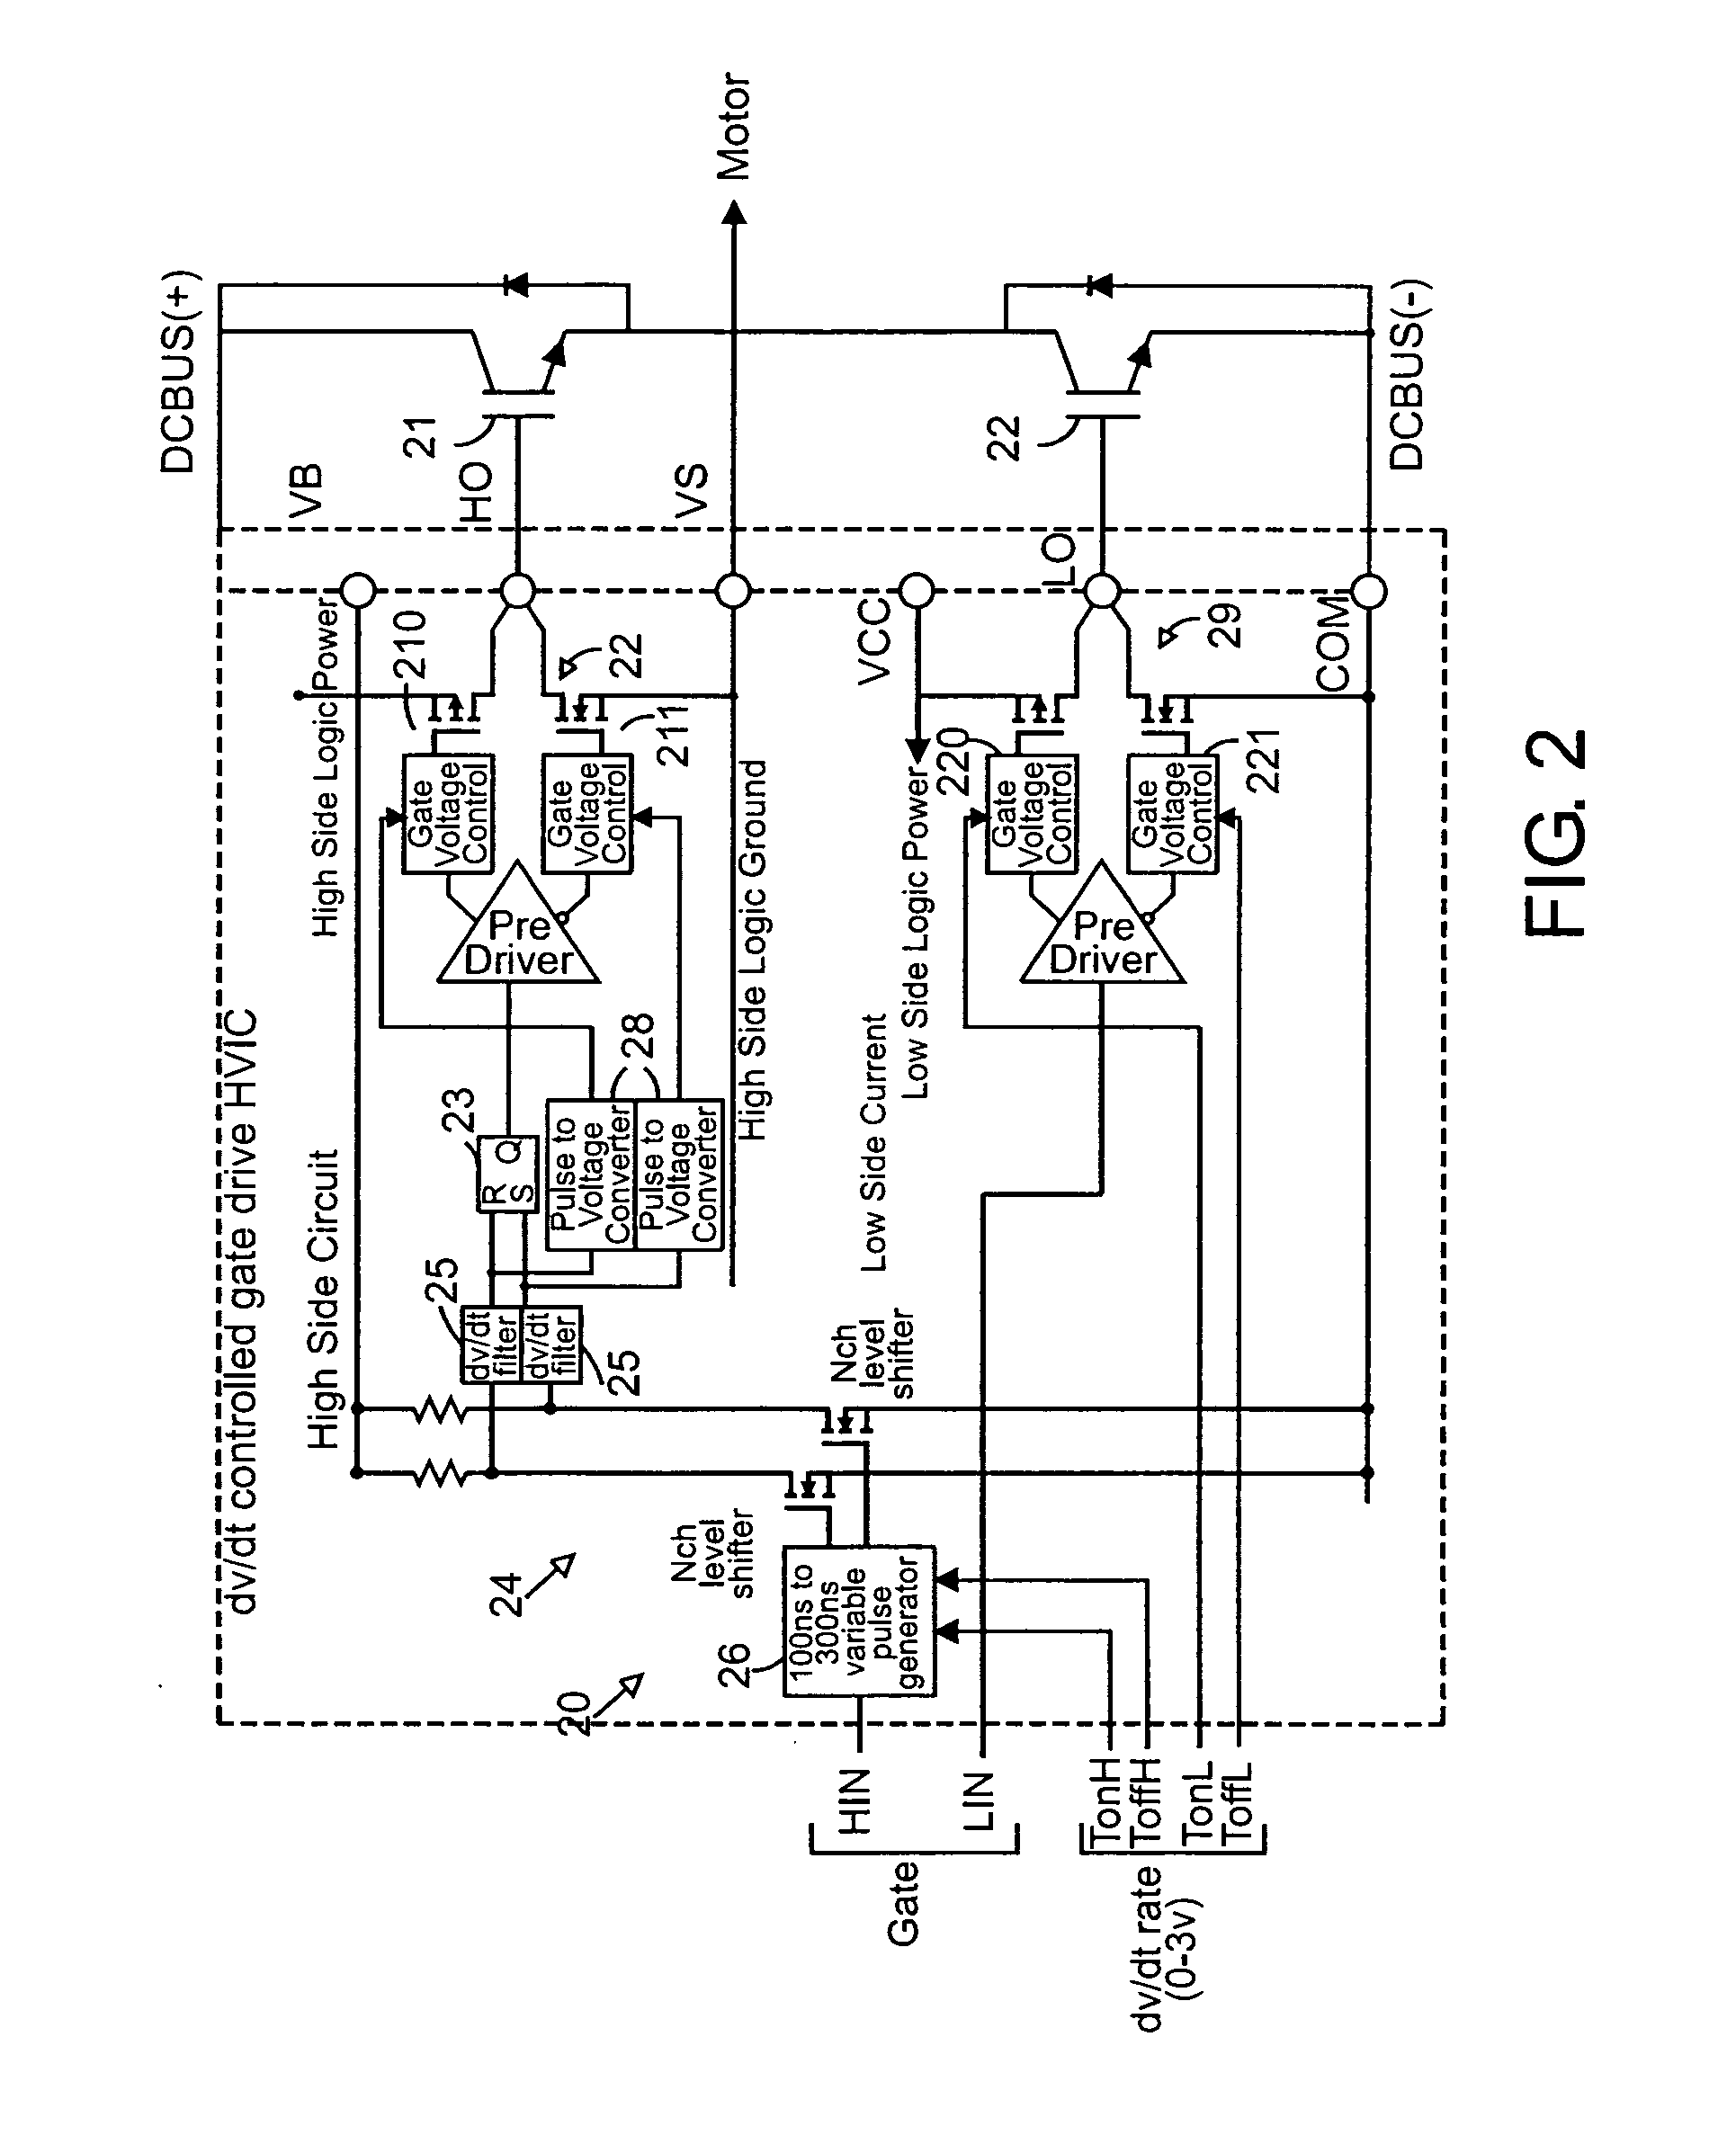 Global closed loop control system with DV/DT control and EMI/switching loss reduction